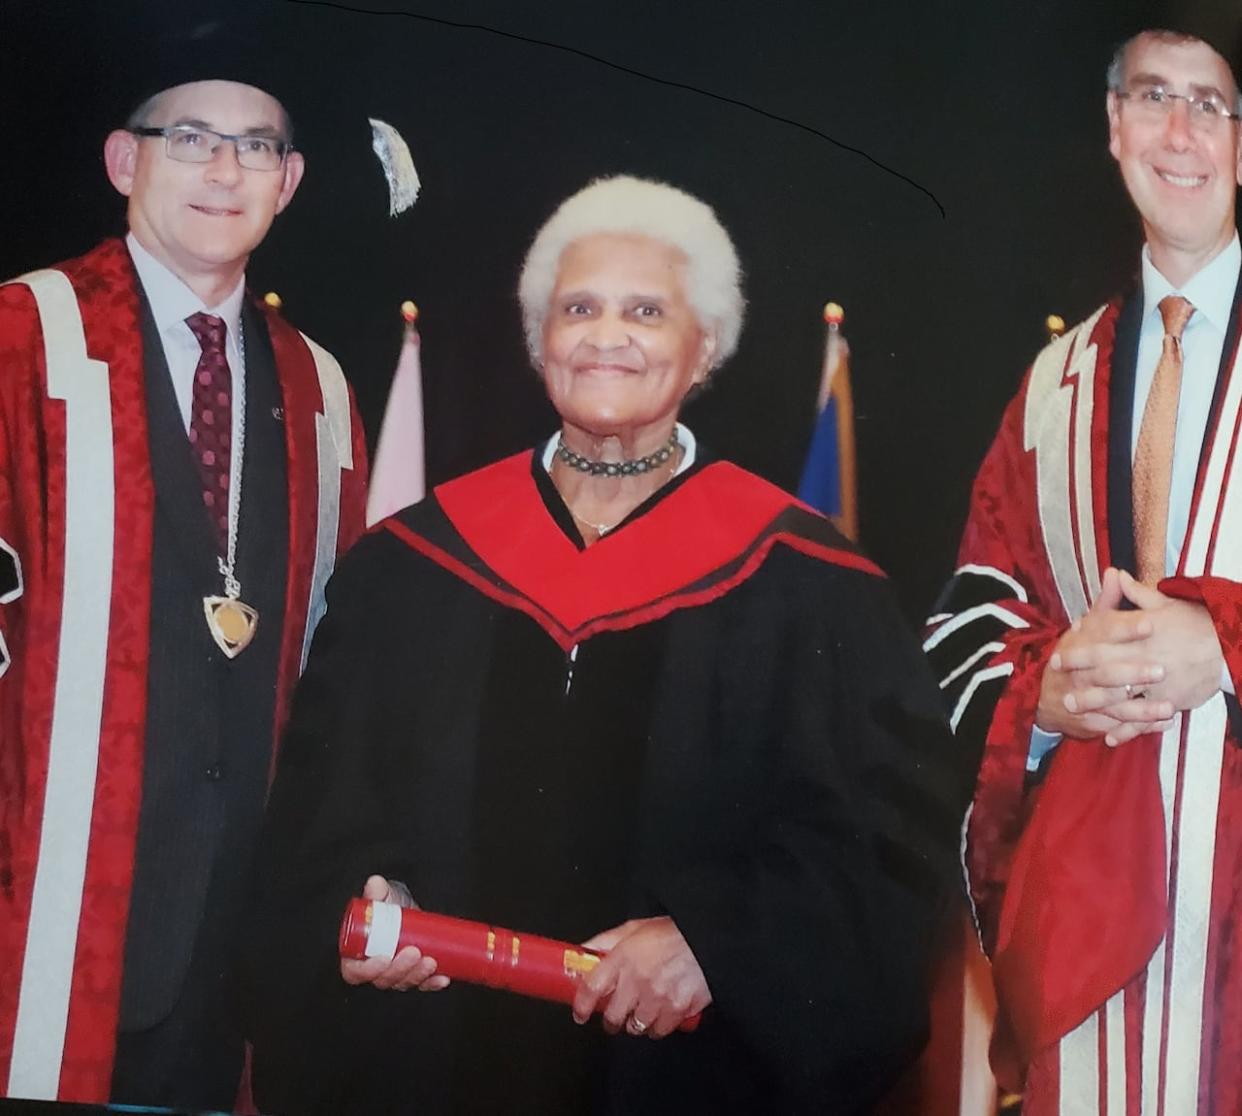 In 2019, Gloria Borden received an honorary doctorate from St. Mary's University. (Submitted by Kurt Borden - image credit)